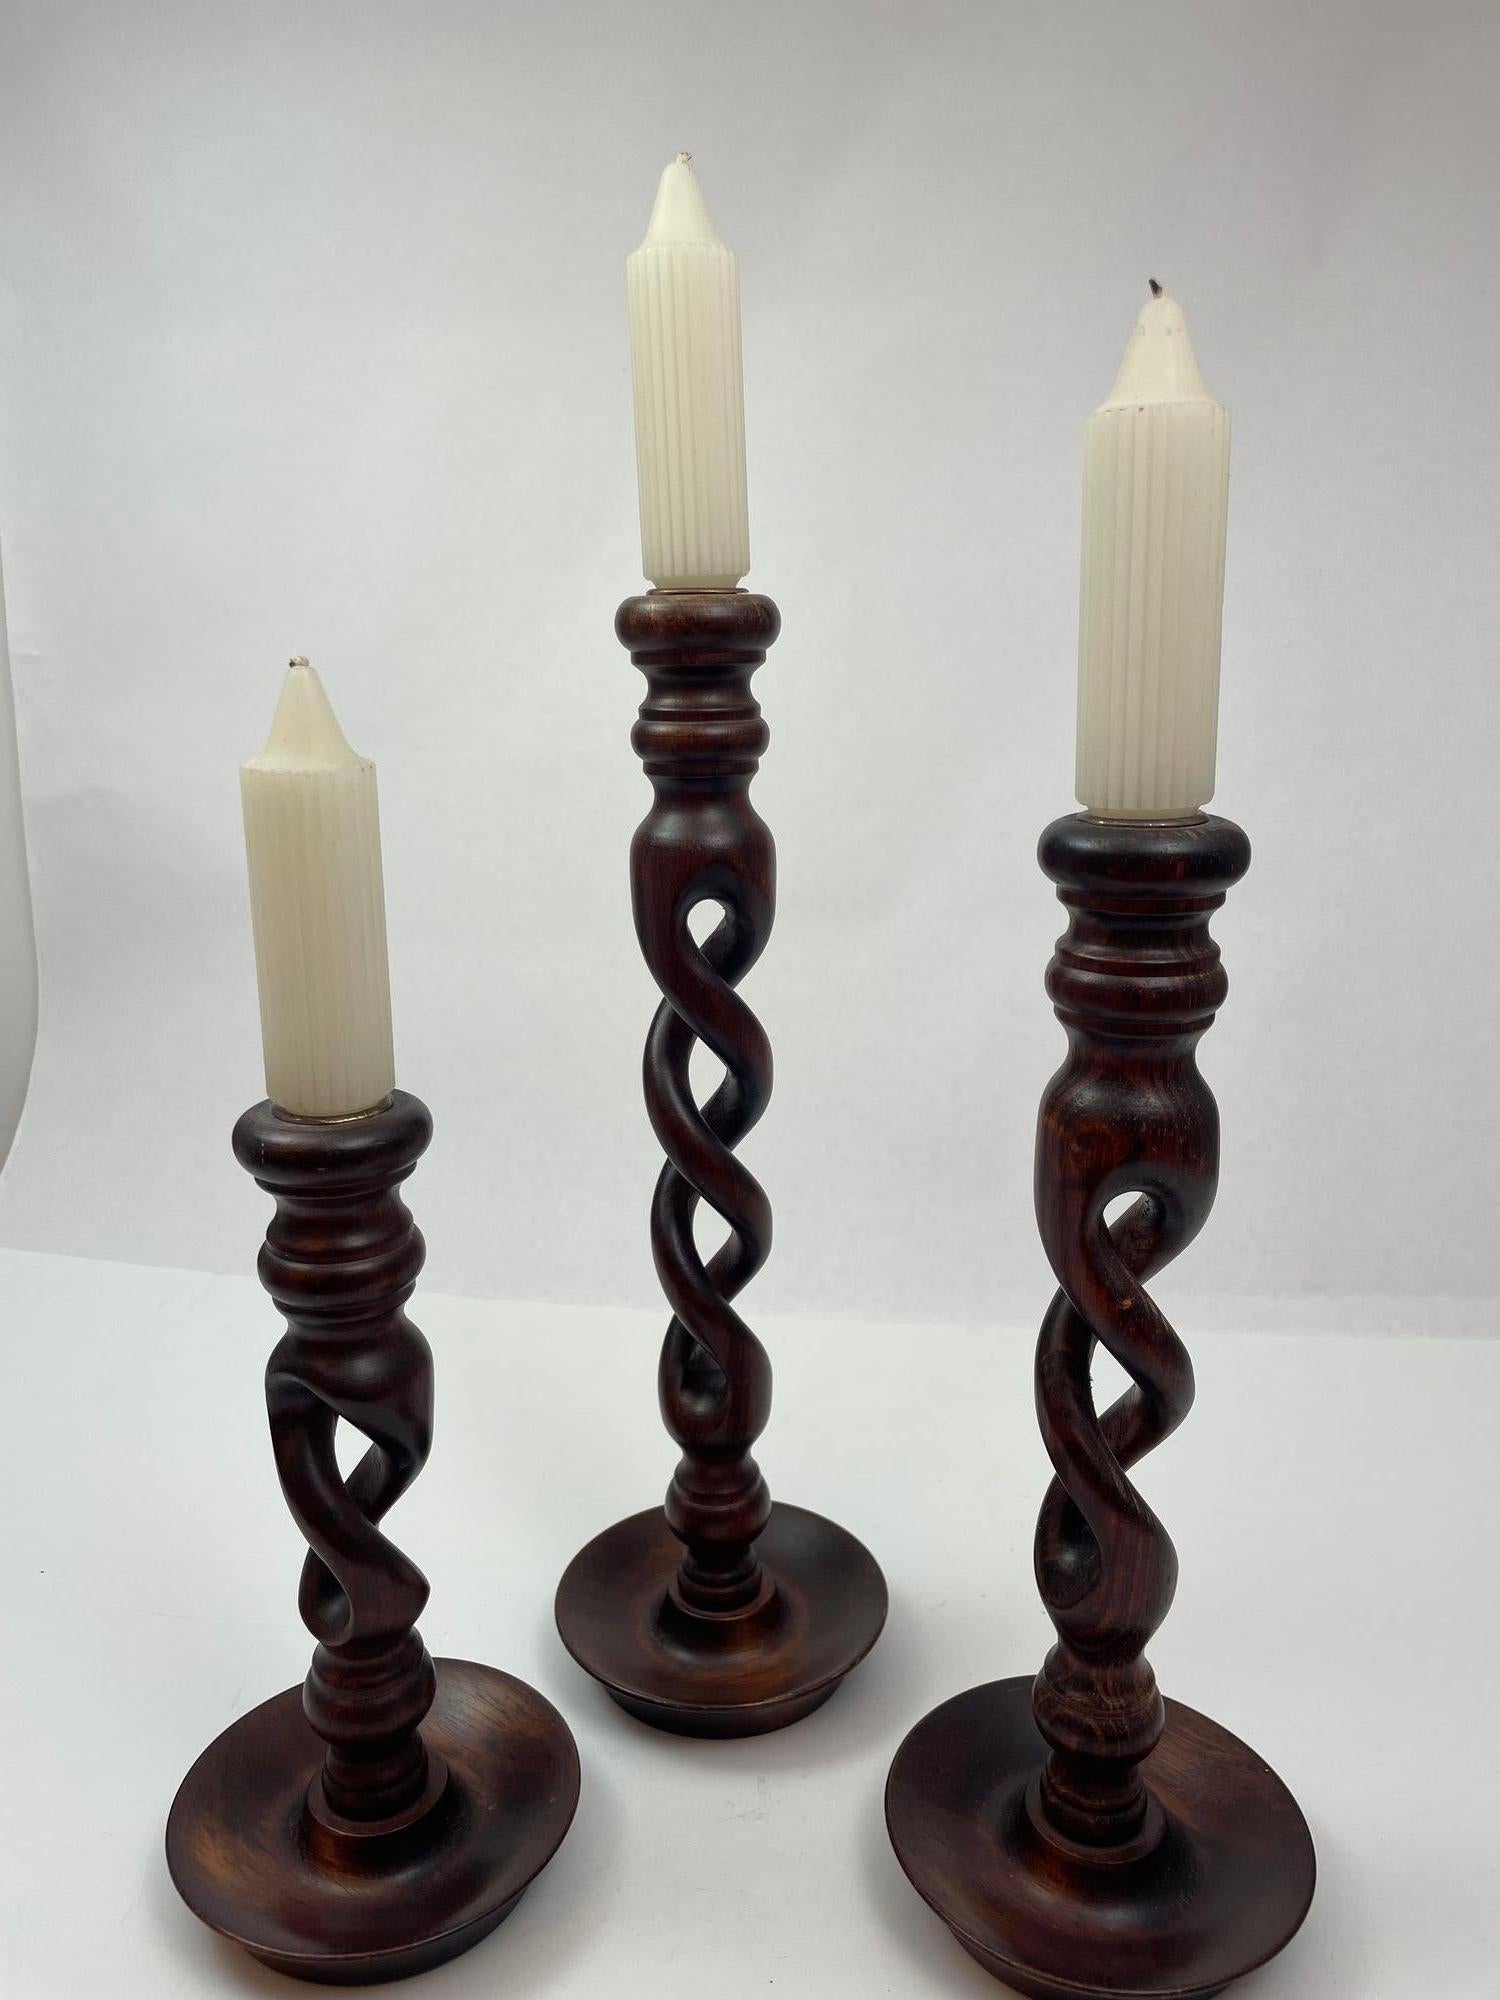 Open Barley Twist Wooden English Candlesticks set of 3.
Elegant Victorian pair of barley twist wooden candlesticks on round base.
Set of 3 in different height English oak open barley twist wooden candlesticks topped with brass candleholders.
A rare